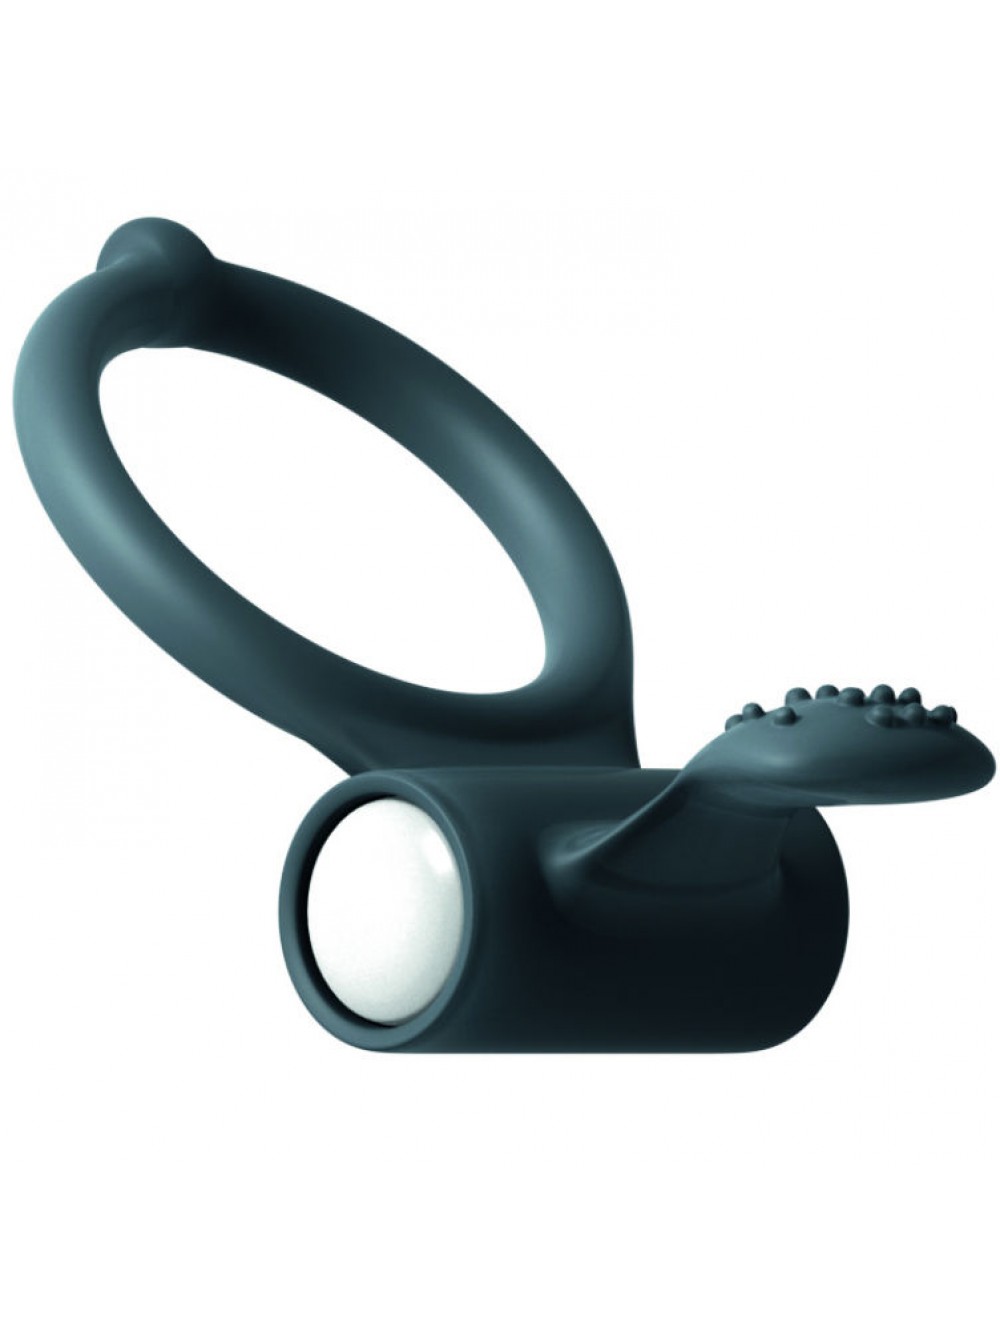 MARC DORCELL POWER CLIT COCK RING